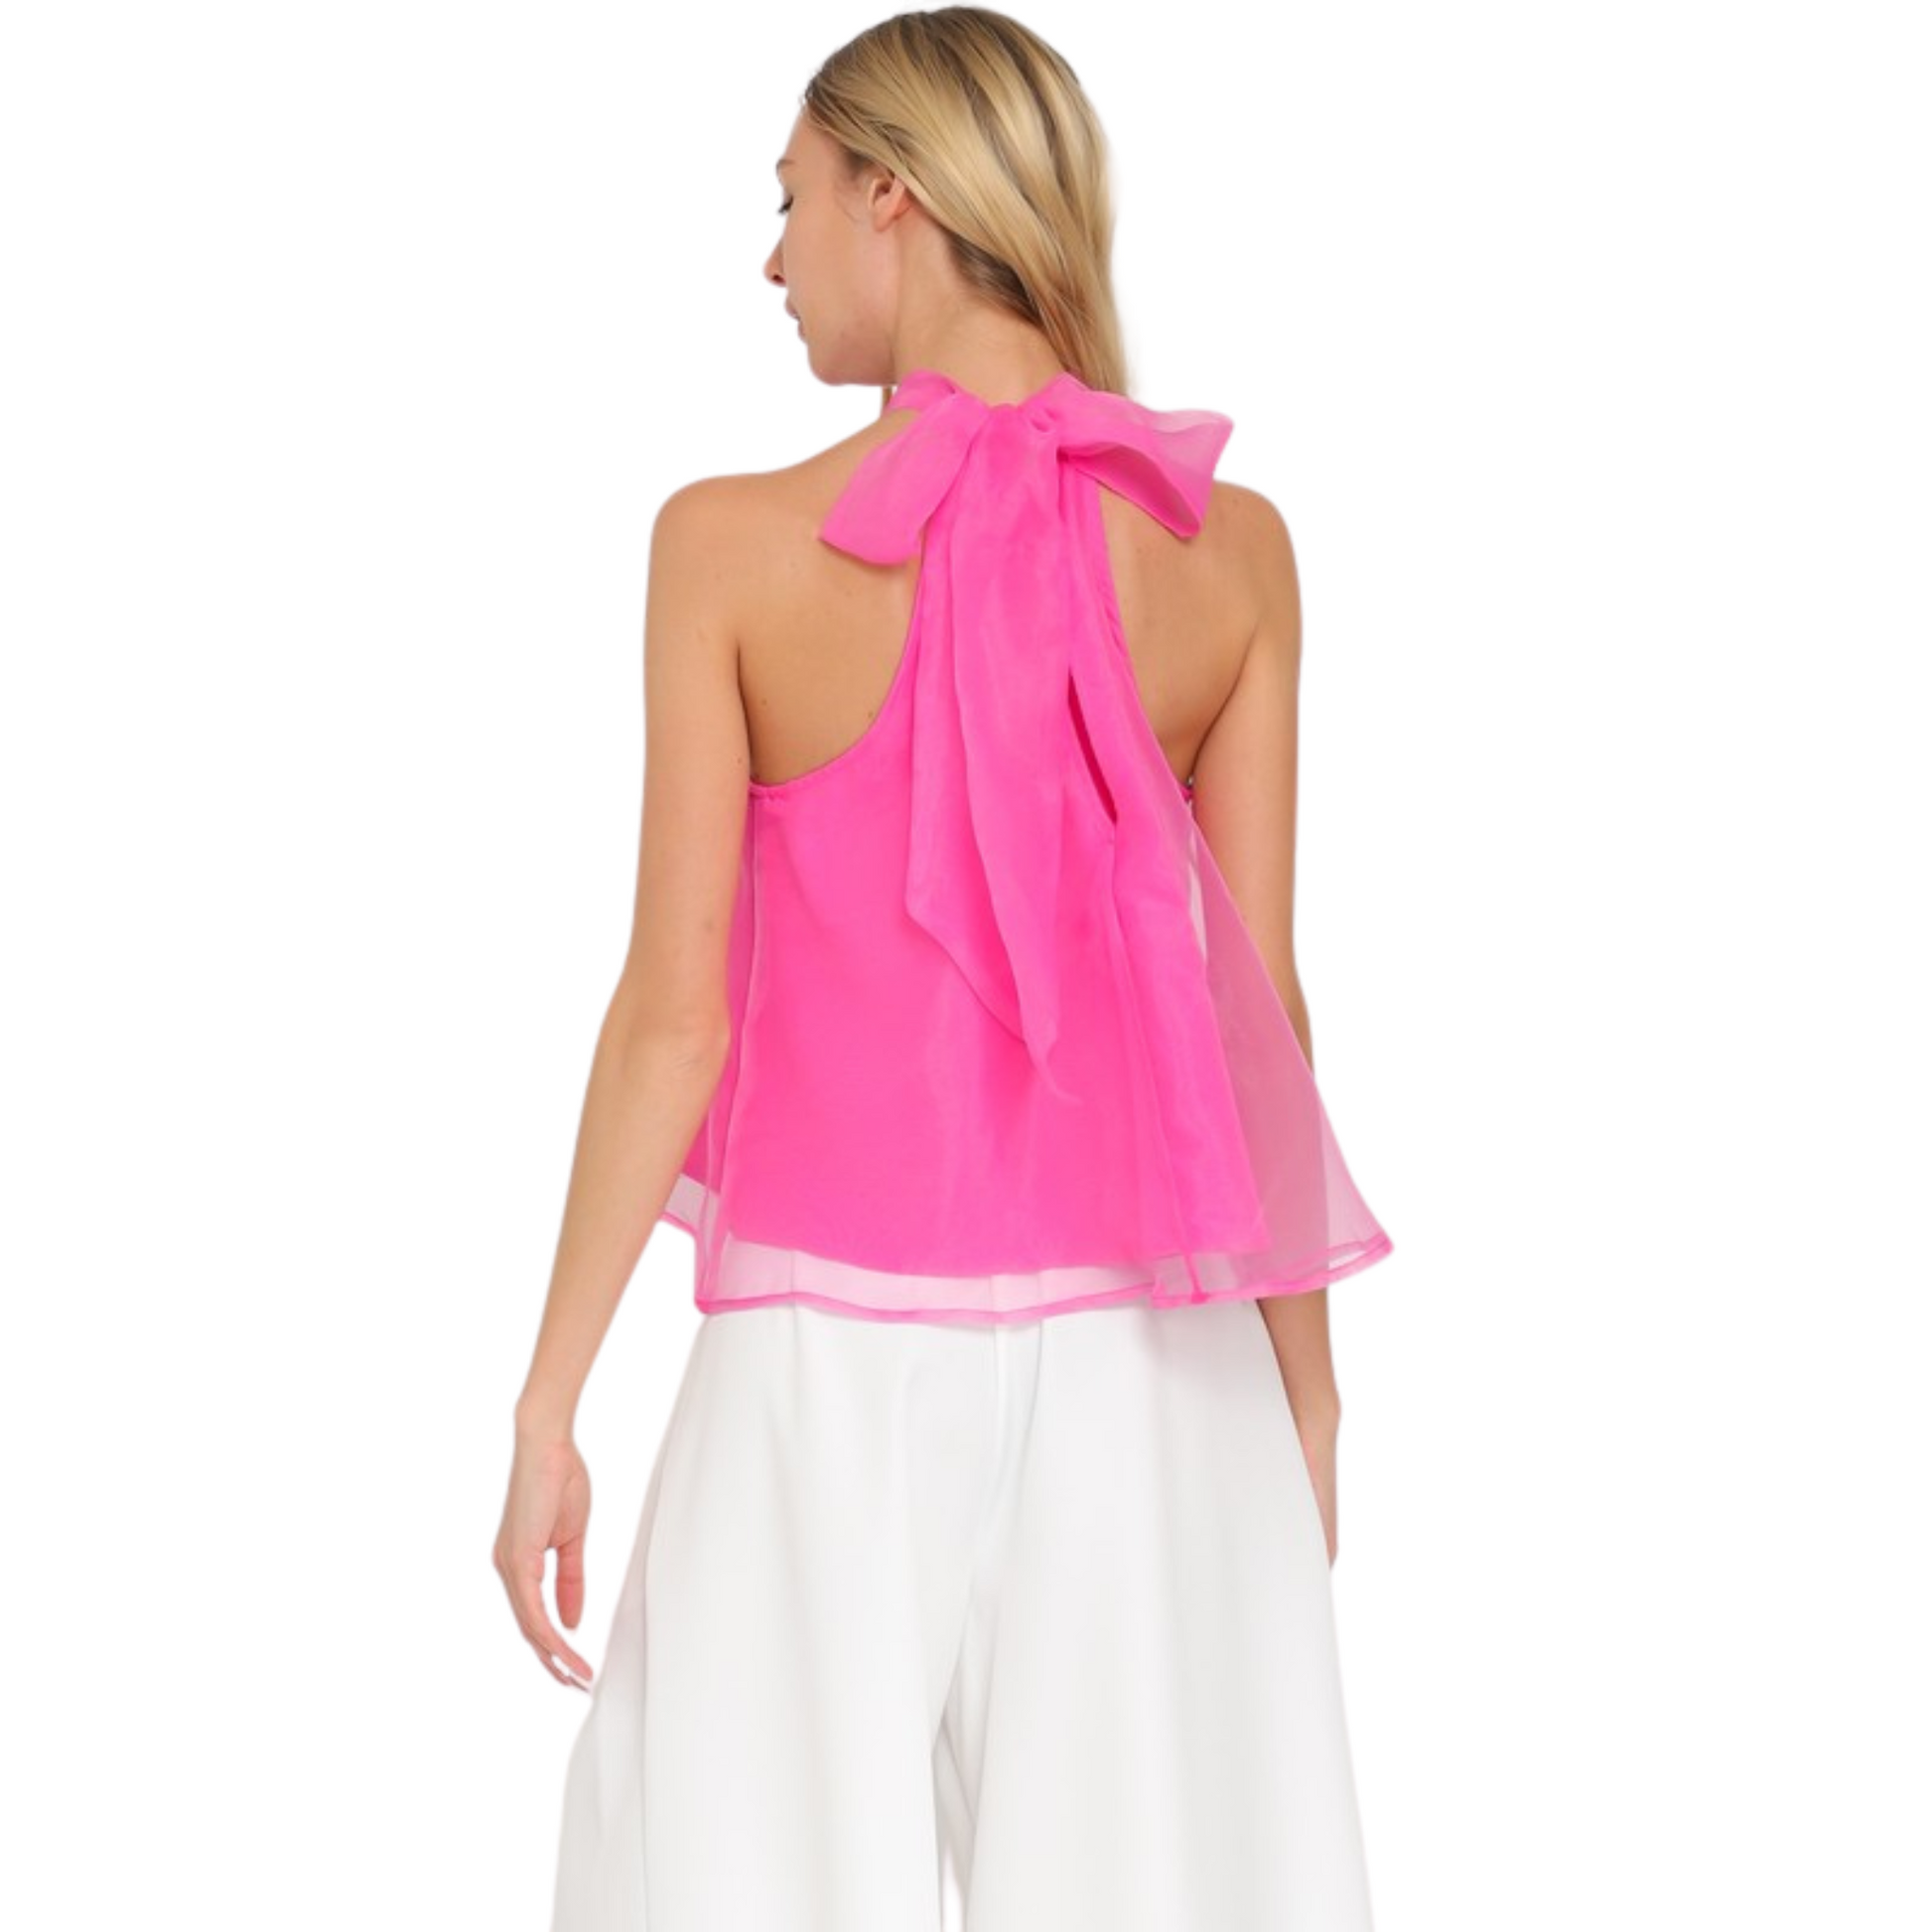 Expertly crafted with a delicate pink organza fabric, this Sleeveless Halter Top exudes elegance and sophistication. The tie back feature provides a customizable fit, making it the perfect addition to any wardrobe. Elevate your style with this effortless halter top.